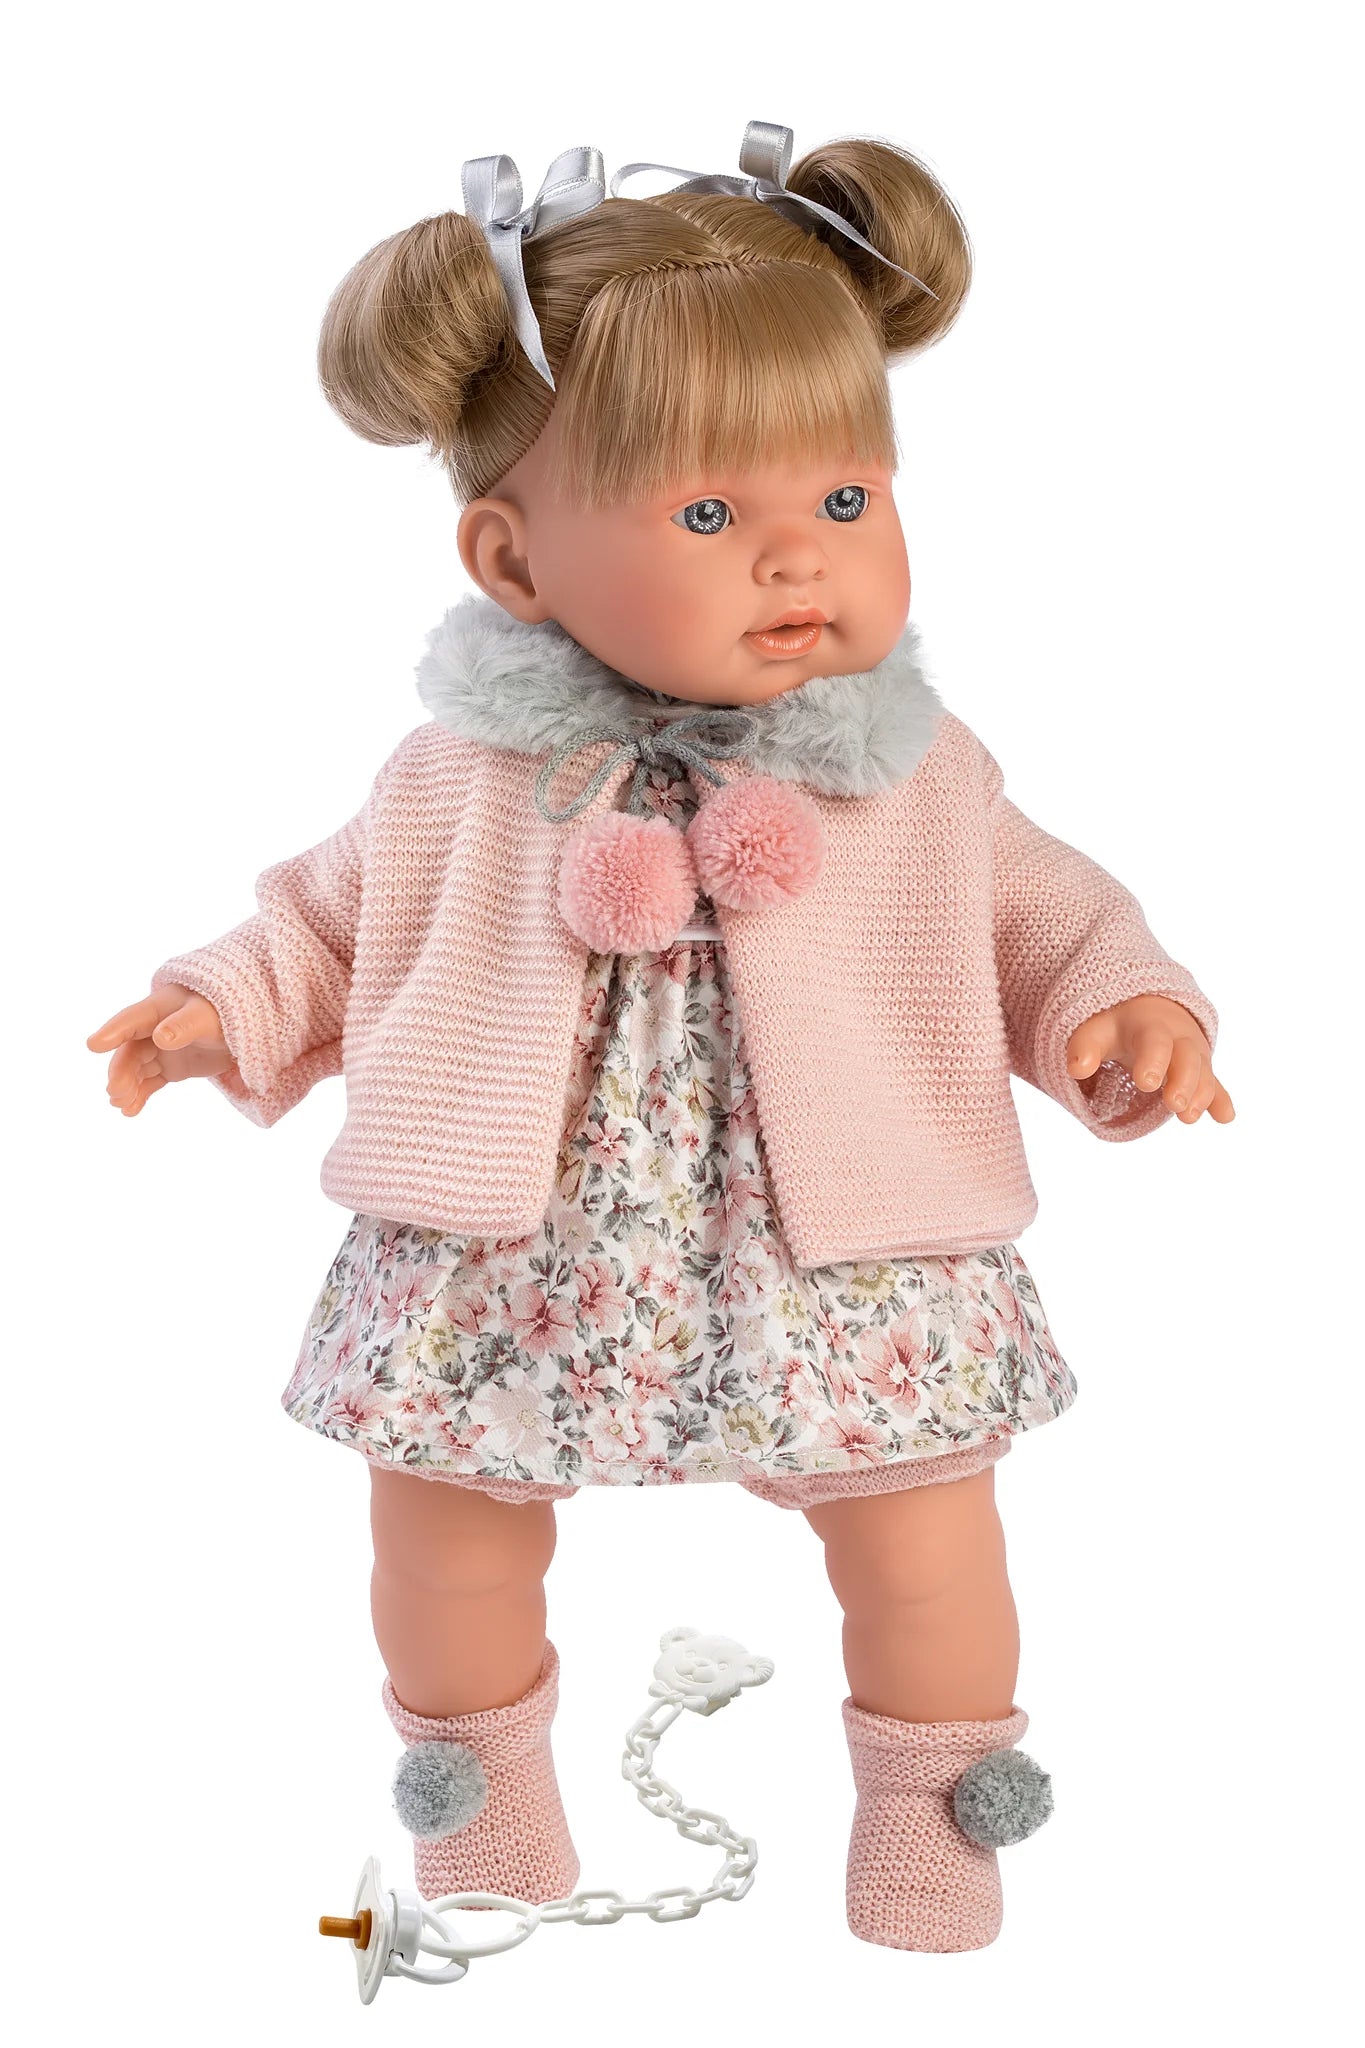 Soft Body Crying Baby Doll Kelsey 16.5